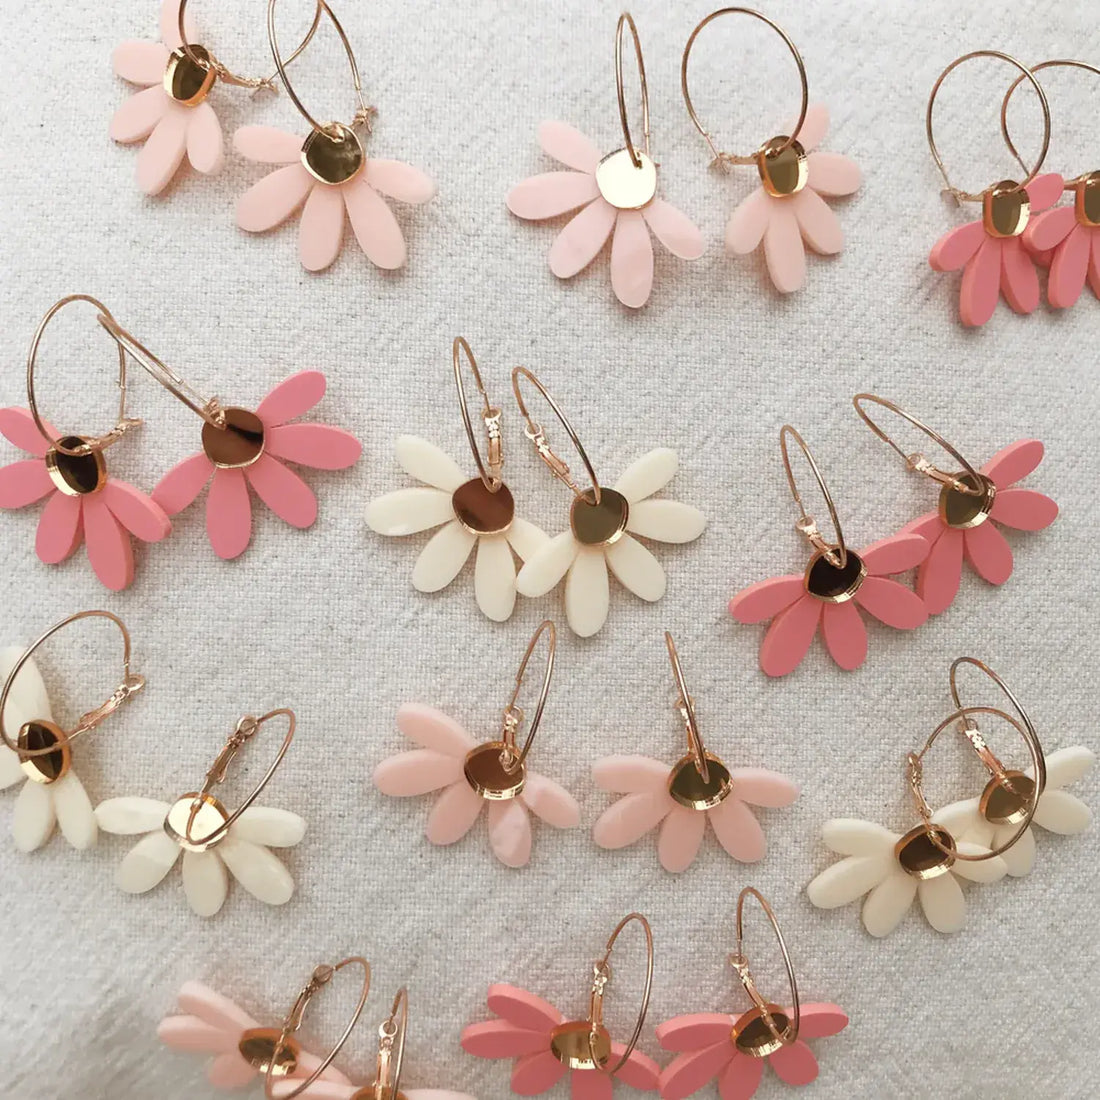 Jumbo Daisy Hoop Earrings in Pale Pink &amp; Gold by Foxie Collective - Muswellbrook Florist - Polly &amp; Co